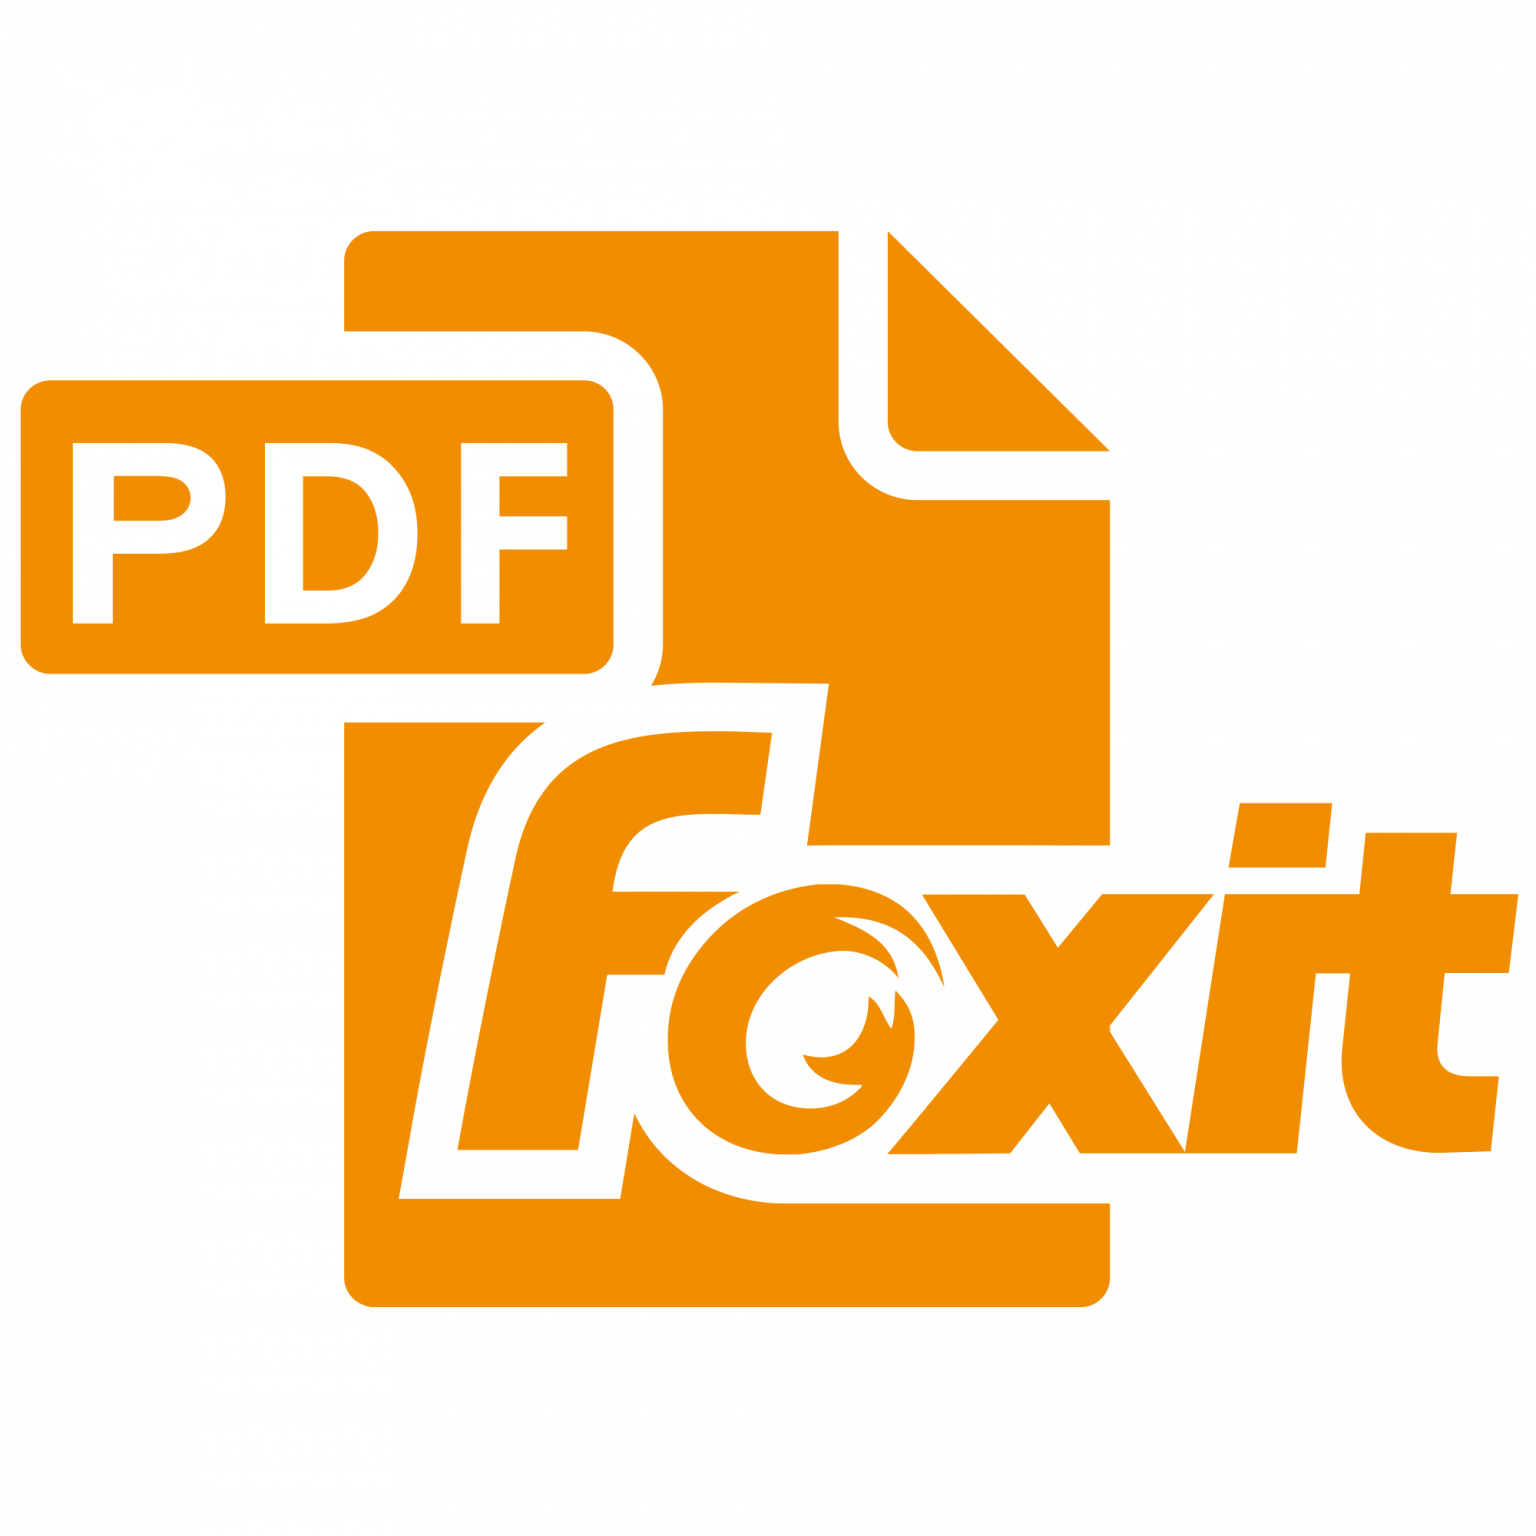 foxit pdf rotate and save